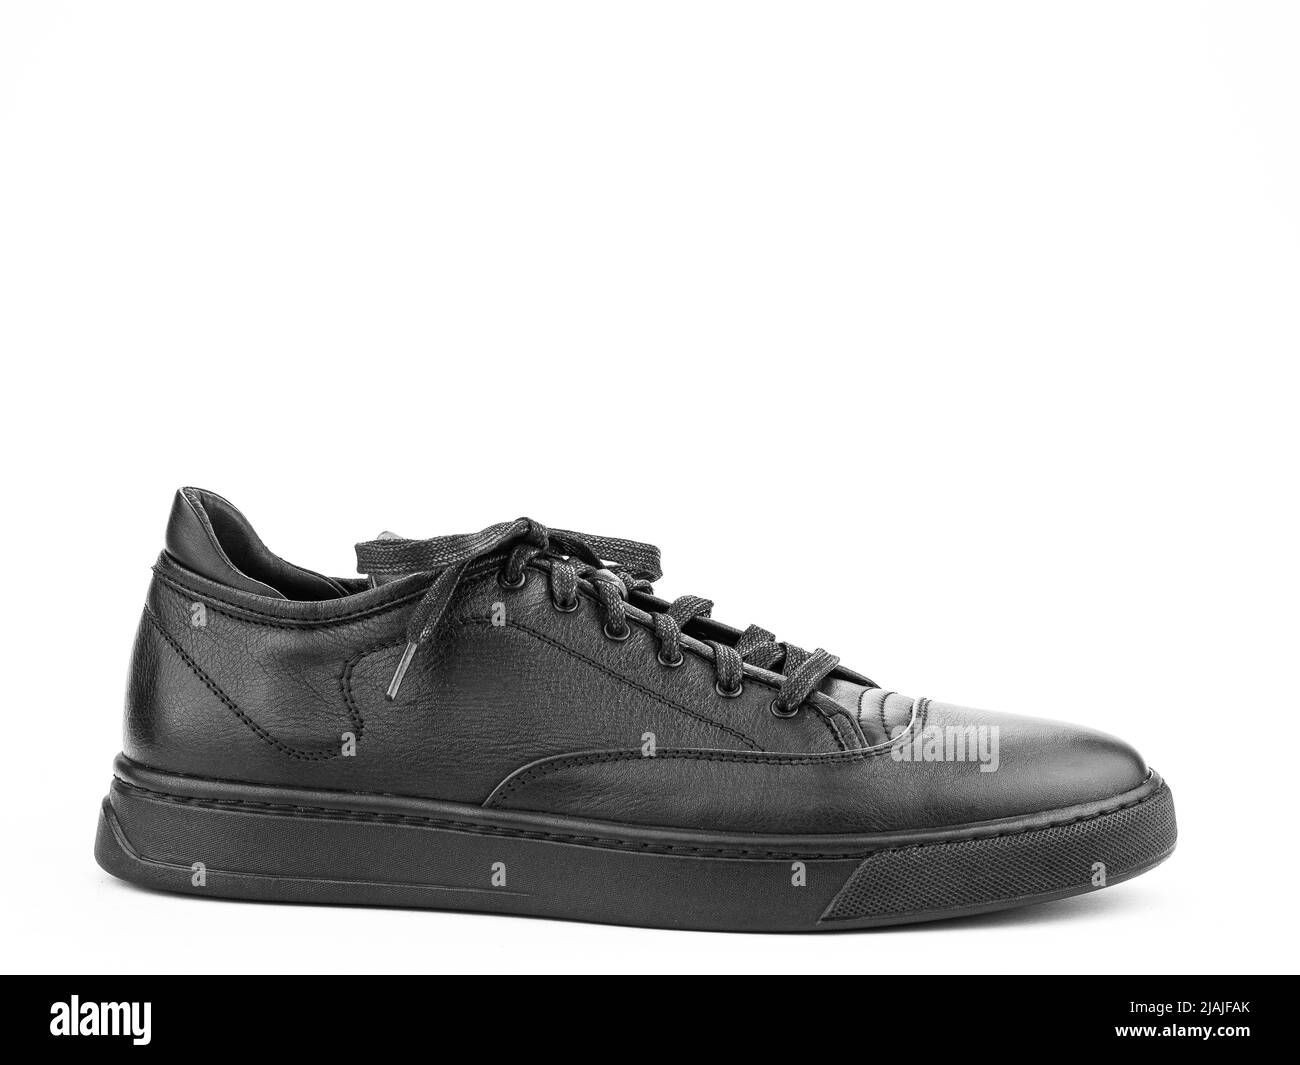 Black leather classic sneakers with laces. Casual men's style. Black rubber soles. Isolated close-up on white background. right side view Stock Photo